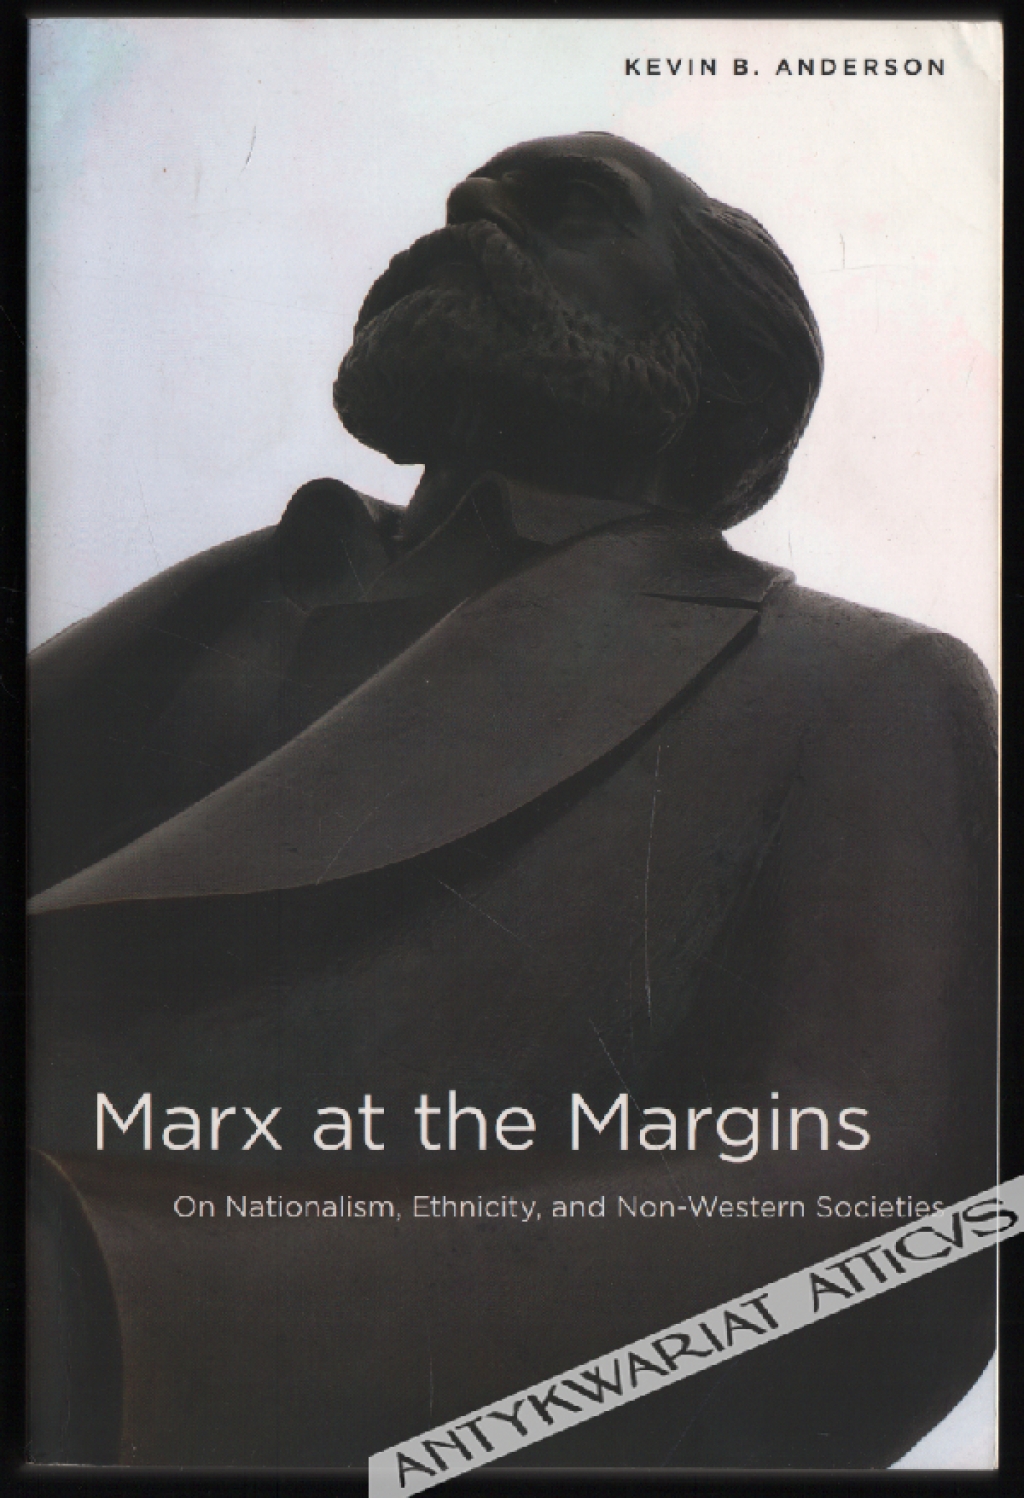 Marx at the Margins. On Nationalism, Ethnicity, and Non-Western Societies